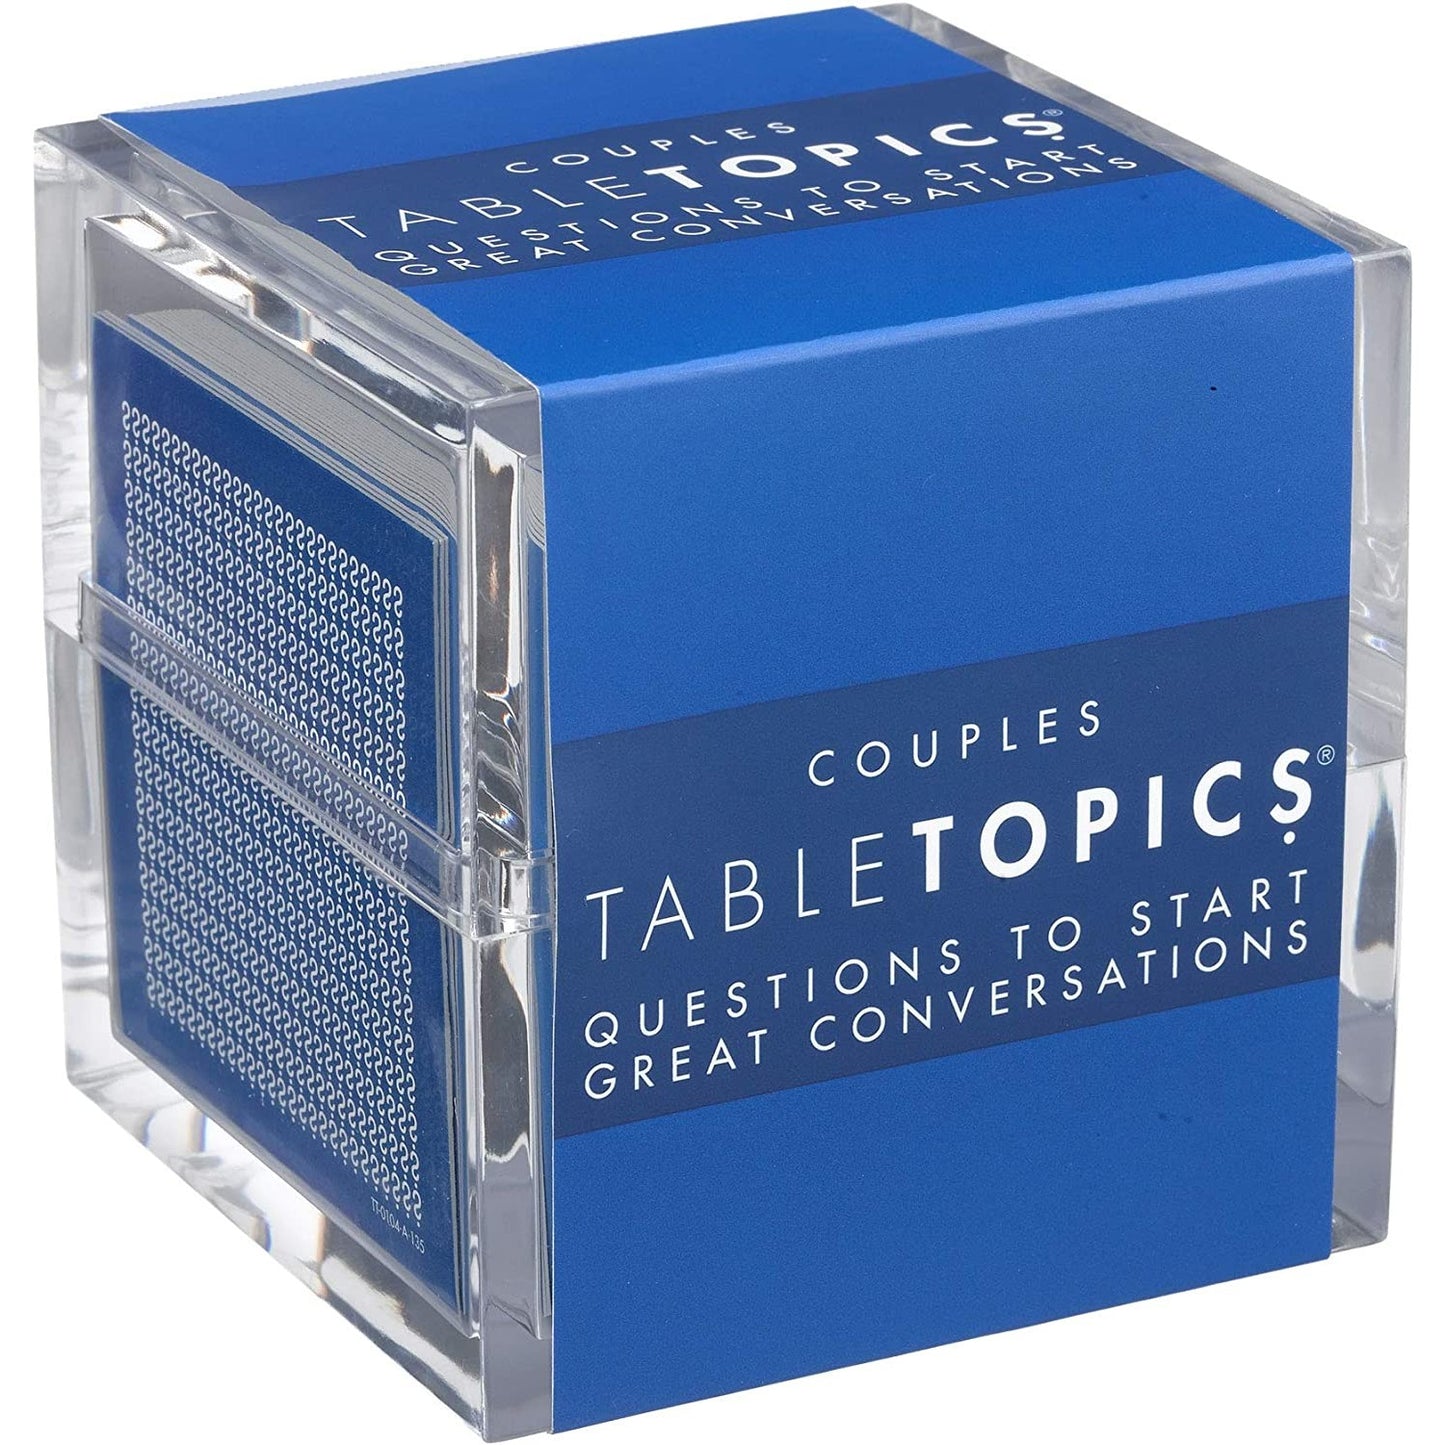 A boxed game titled, "Couples Table Topics, questions to start great conversations."